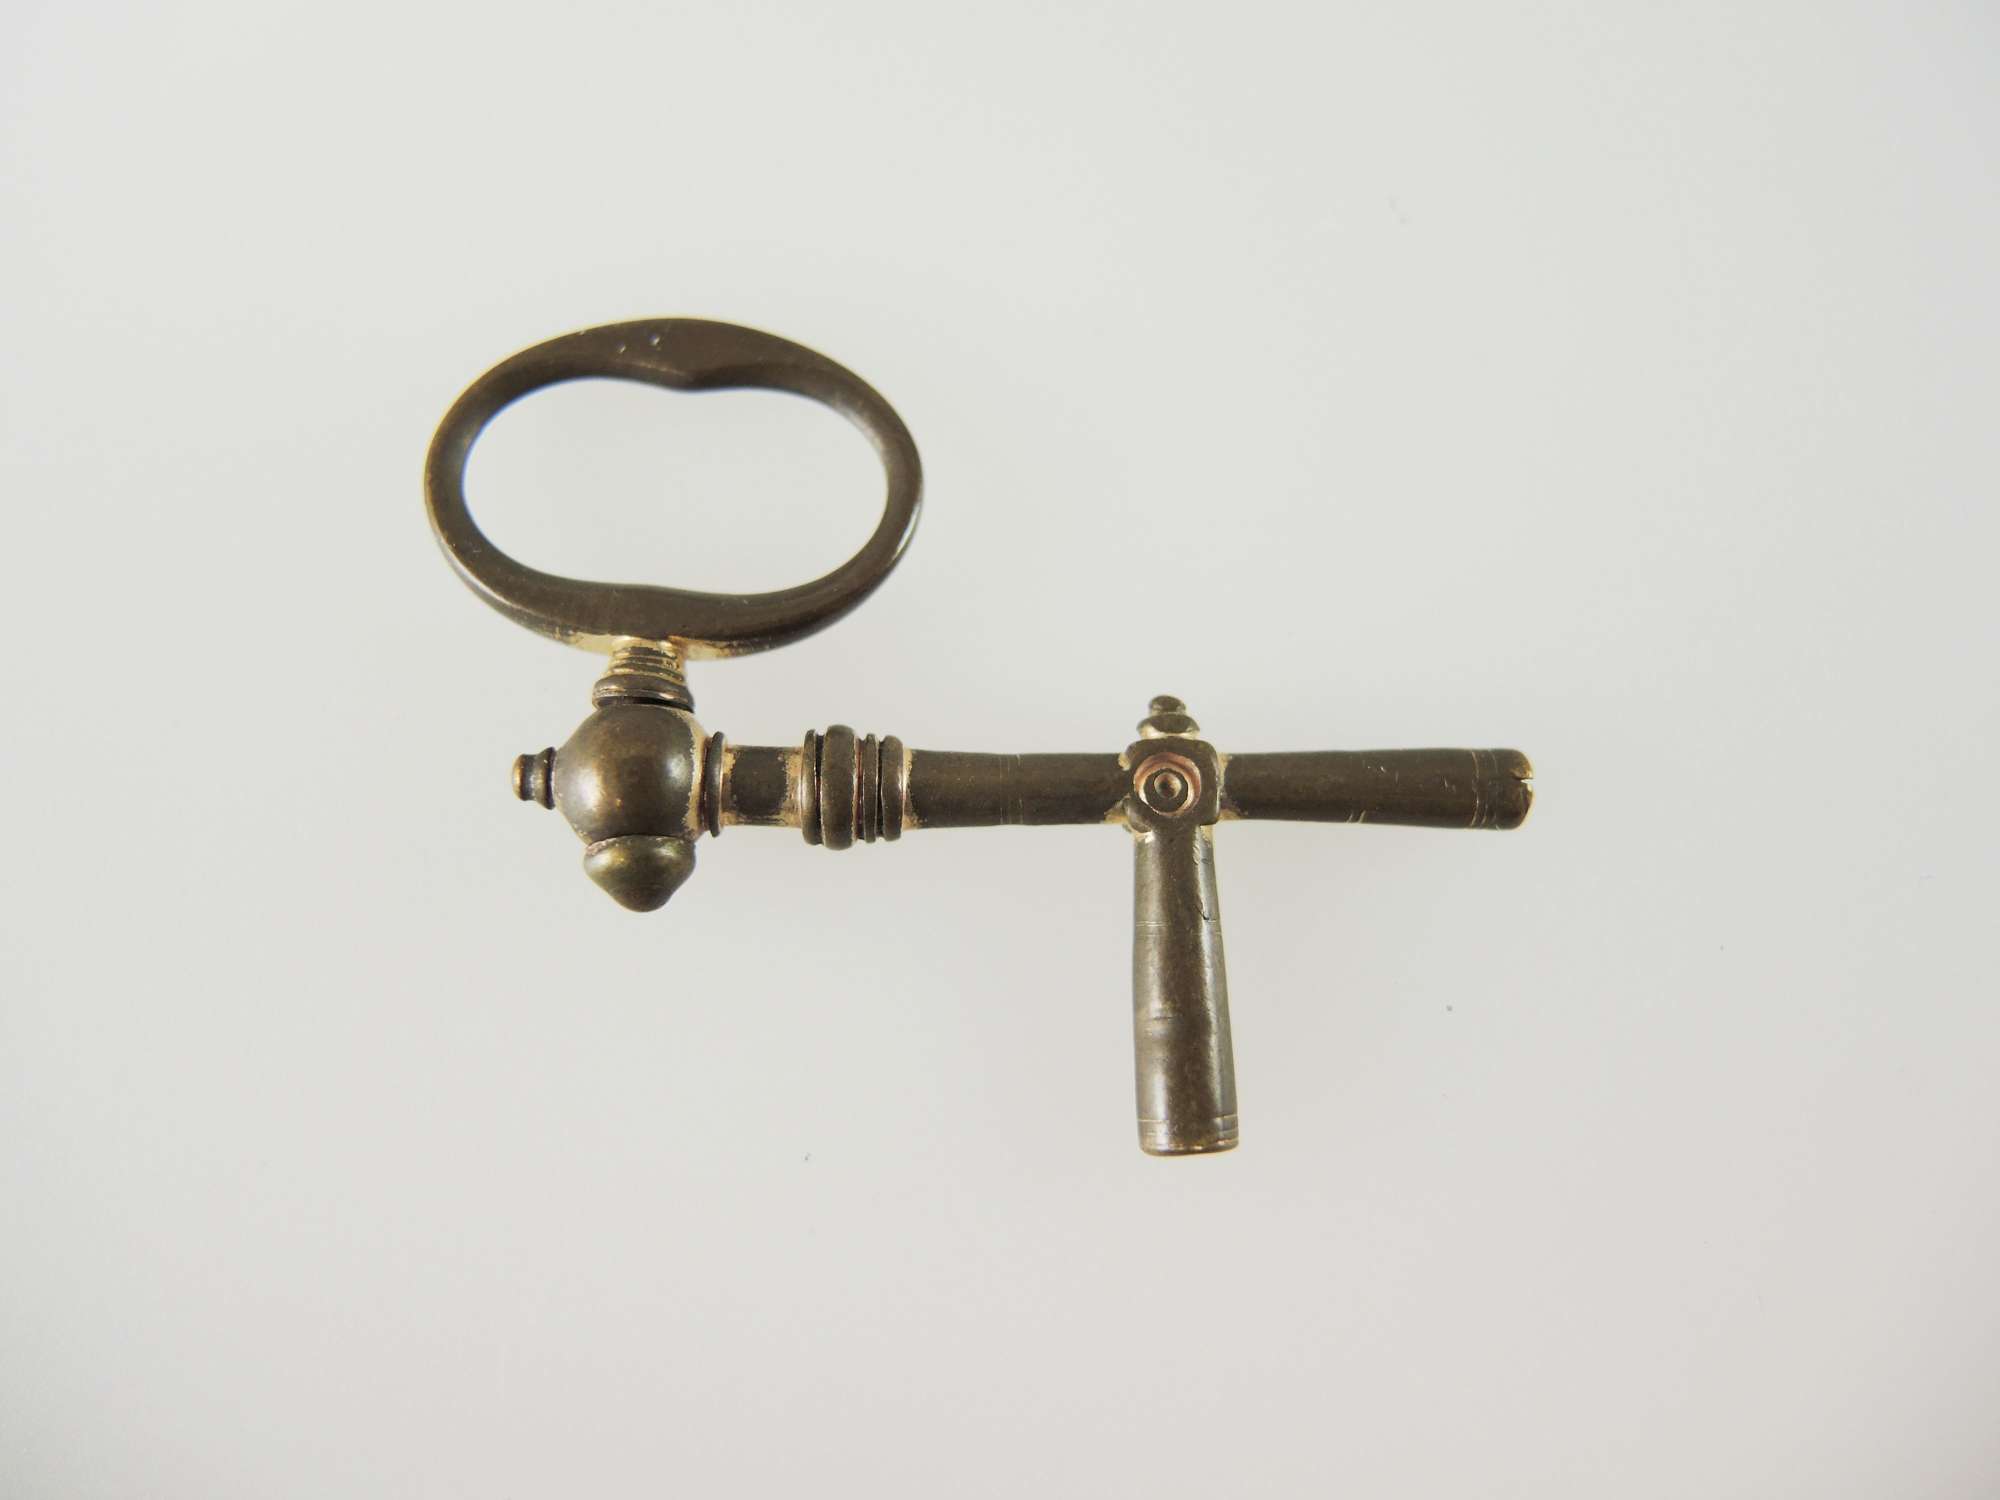 Early gilt double ended Crank pocket watch Key c1750